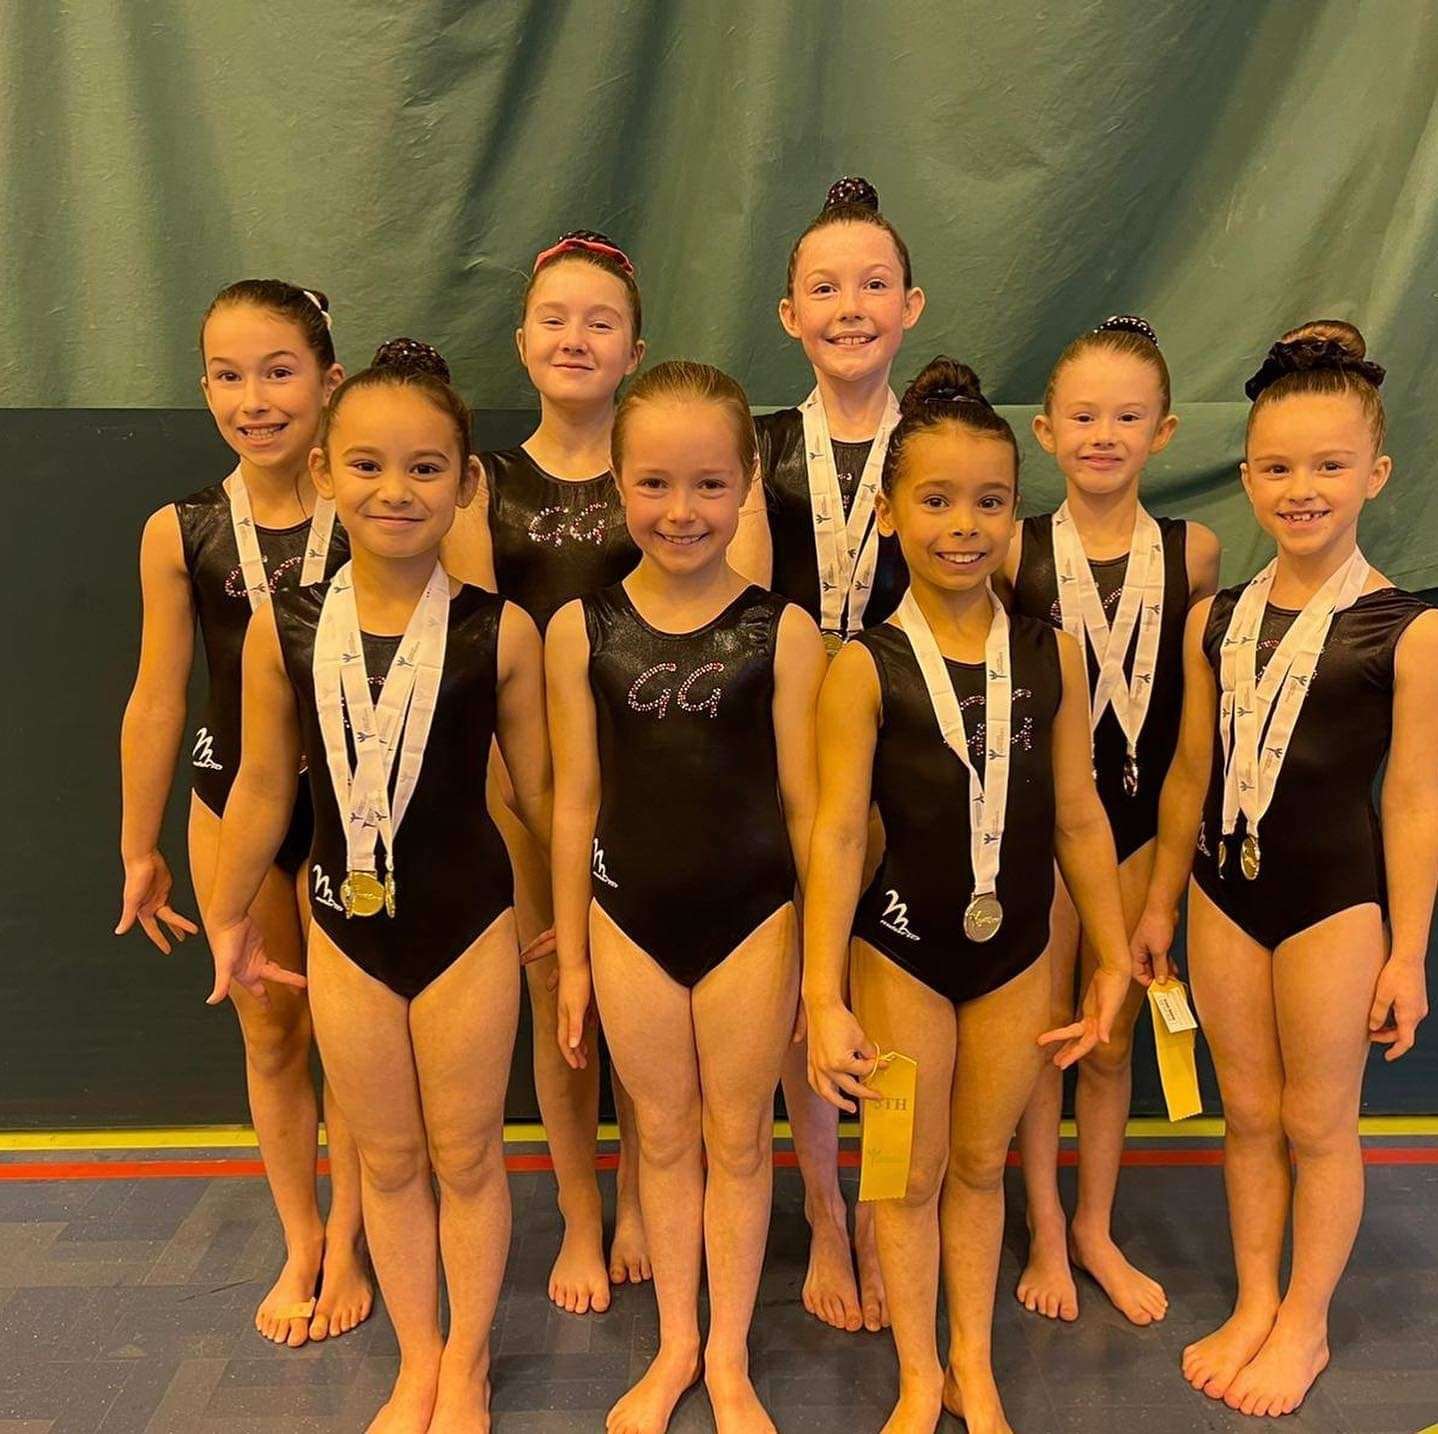 The 8 and 11 Years Beginners gymnasts.